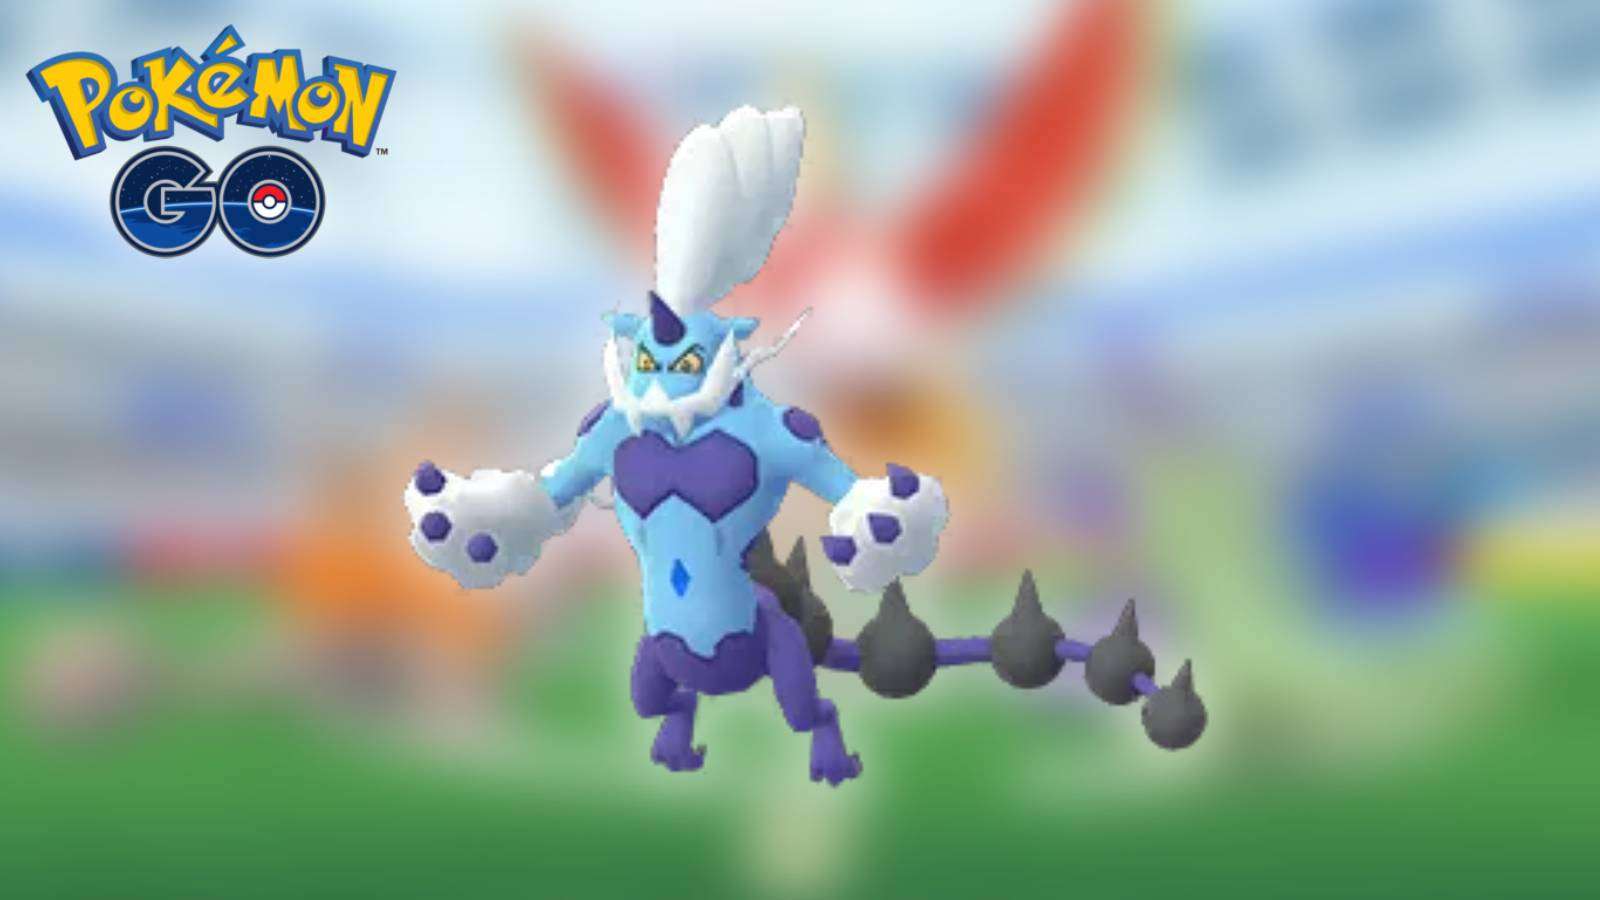 The Pokemon Thundurus appears against a blurred background